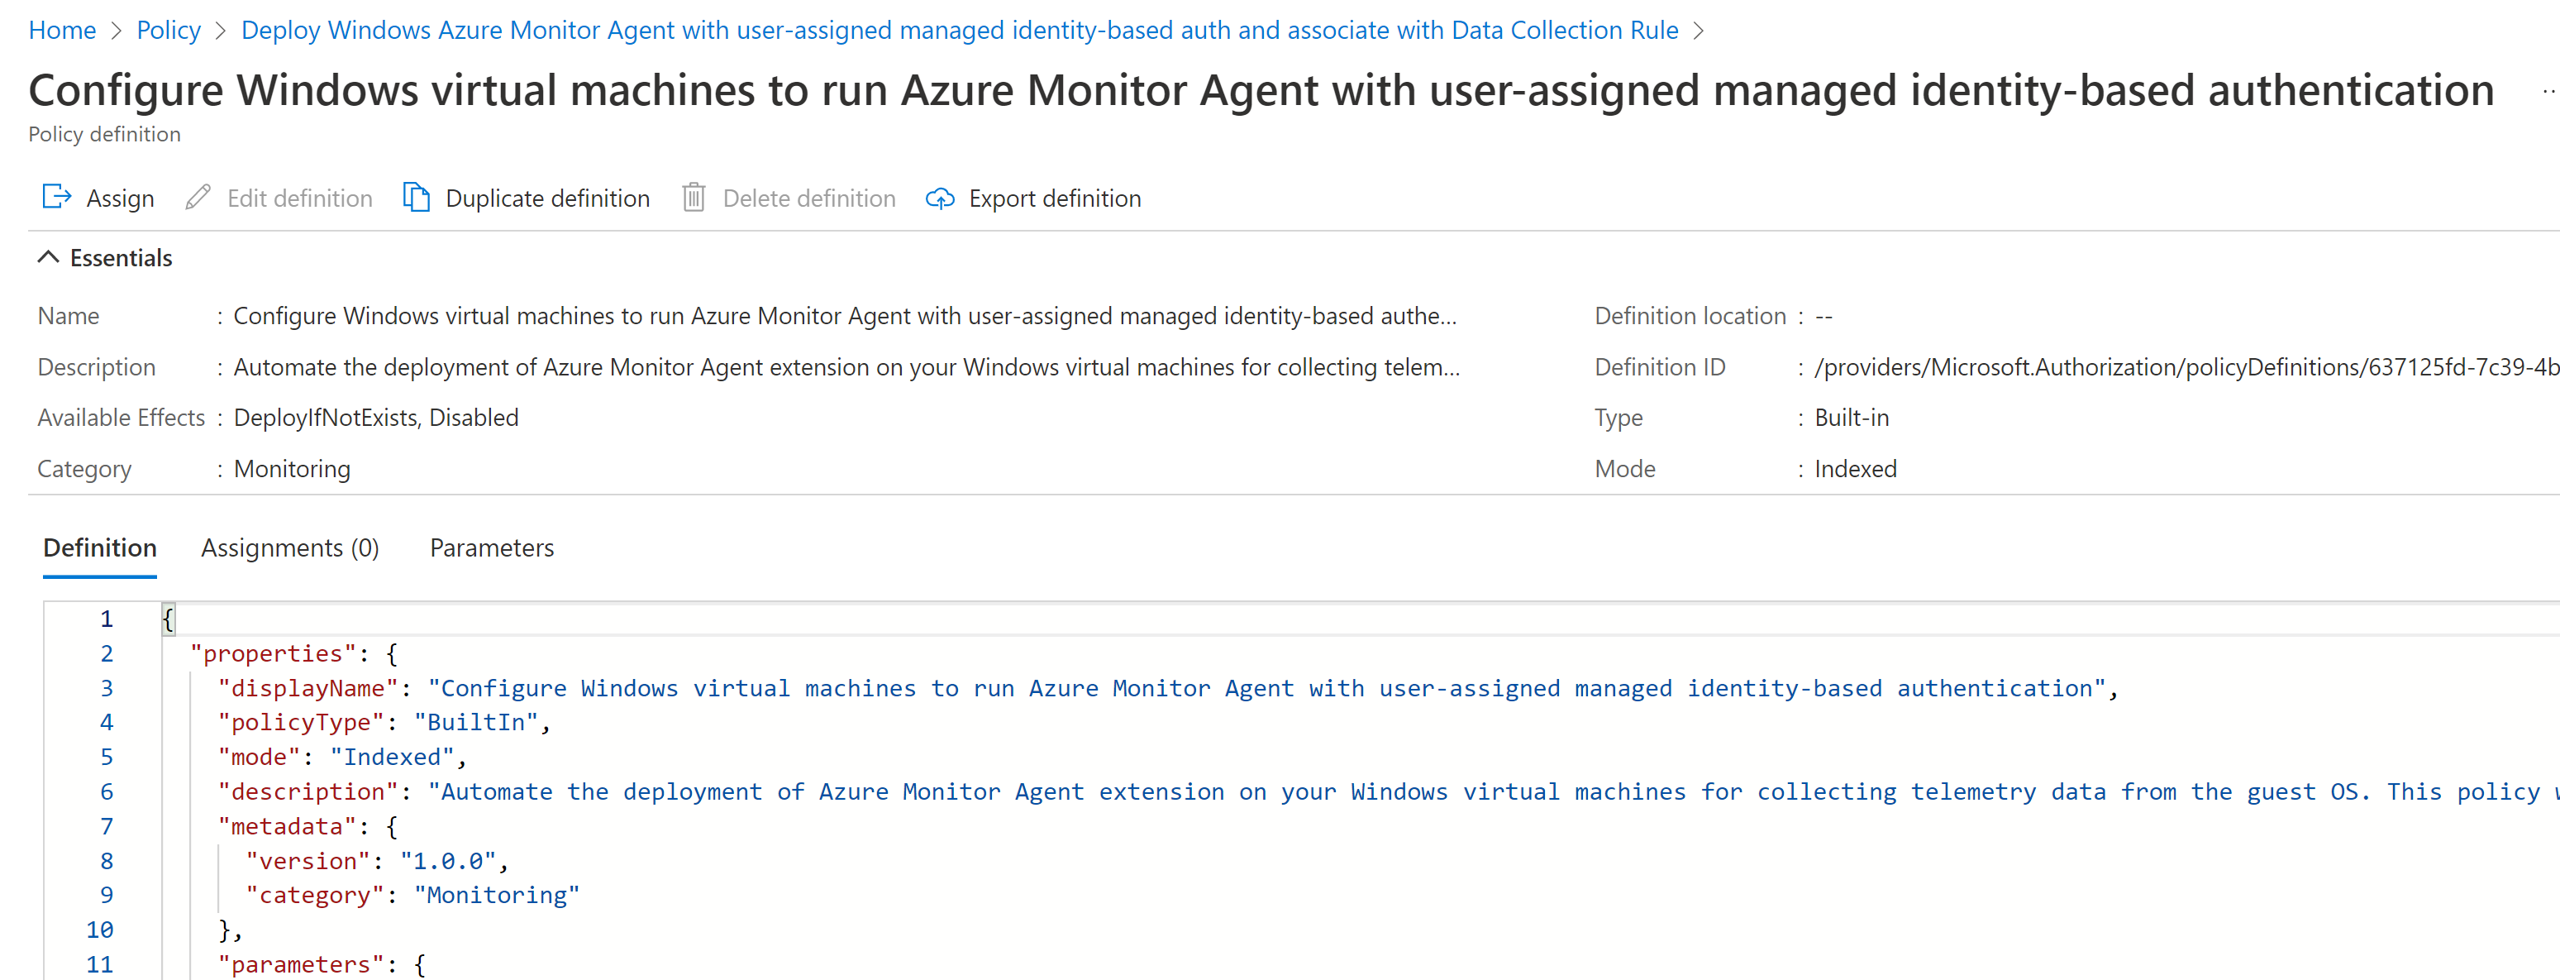 Partial screenshot from the Azure Policy Definitions page that shows policies contained within the initiative for configuring Azure Monitor Agent.